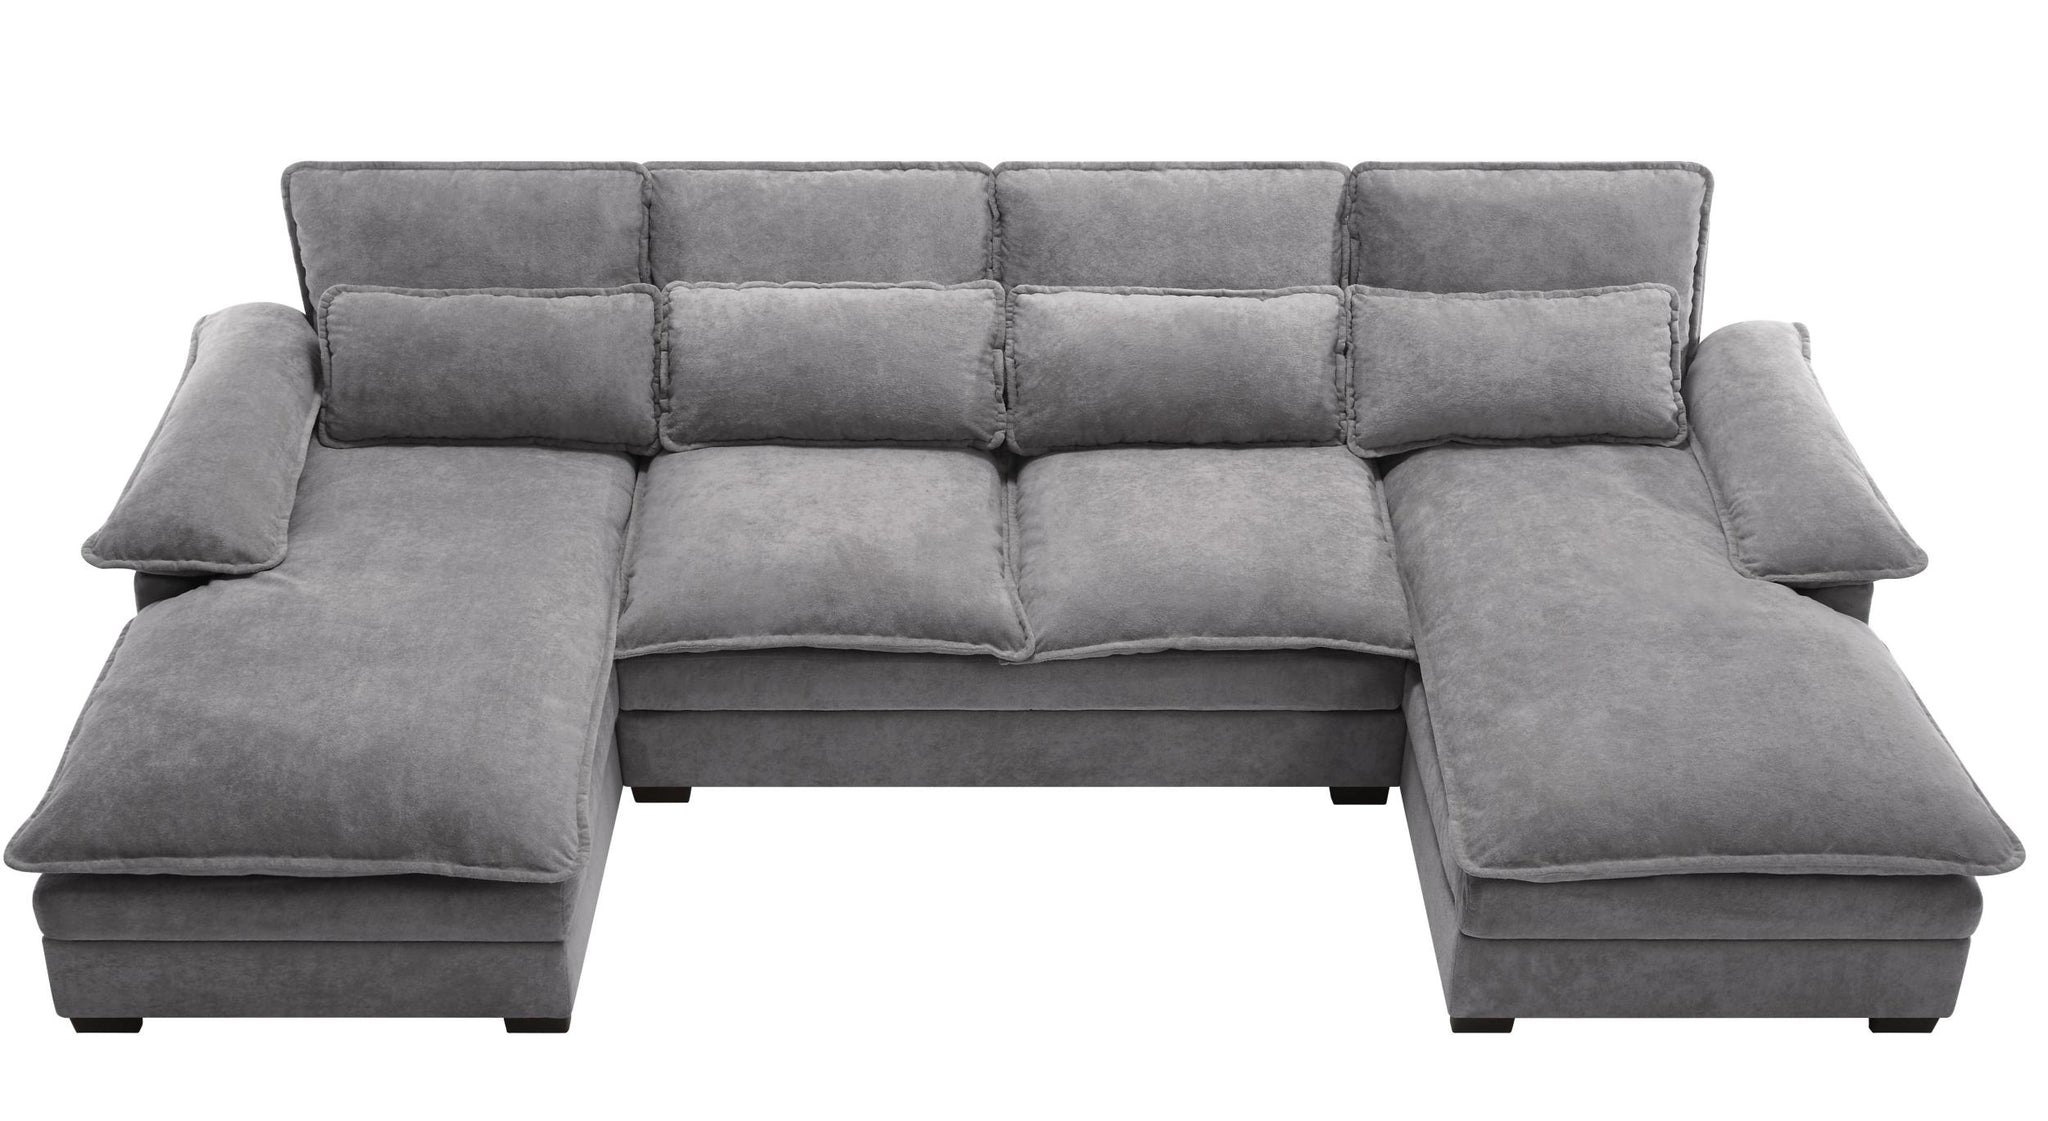 U Shaped Modular Sectional Sofa 6 Deap Seats Corne gray-light brown-polyester-wood-primary living